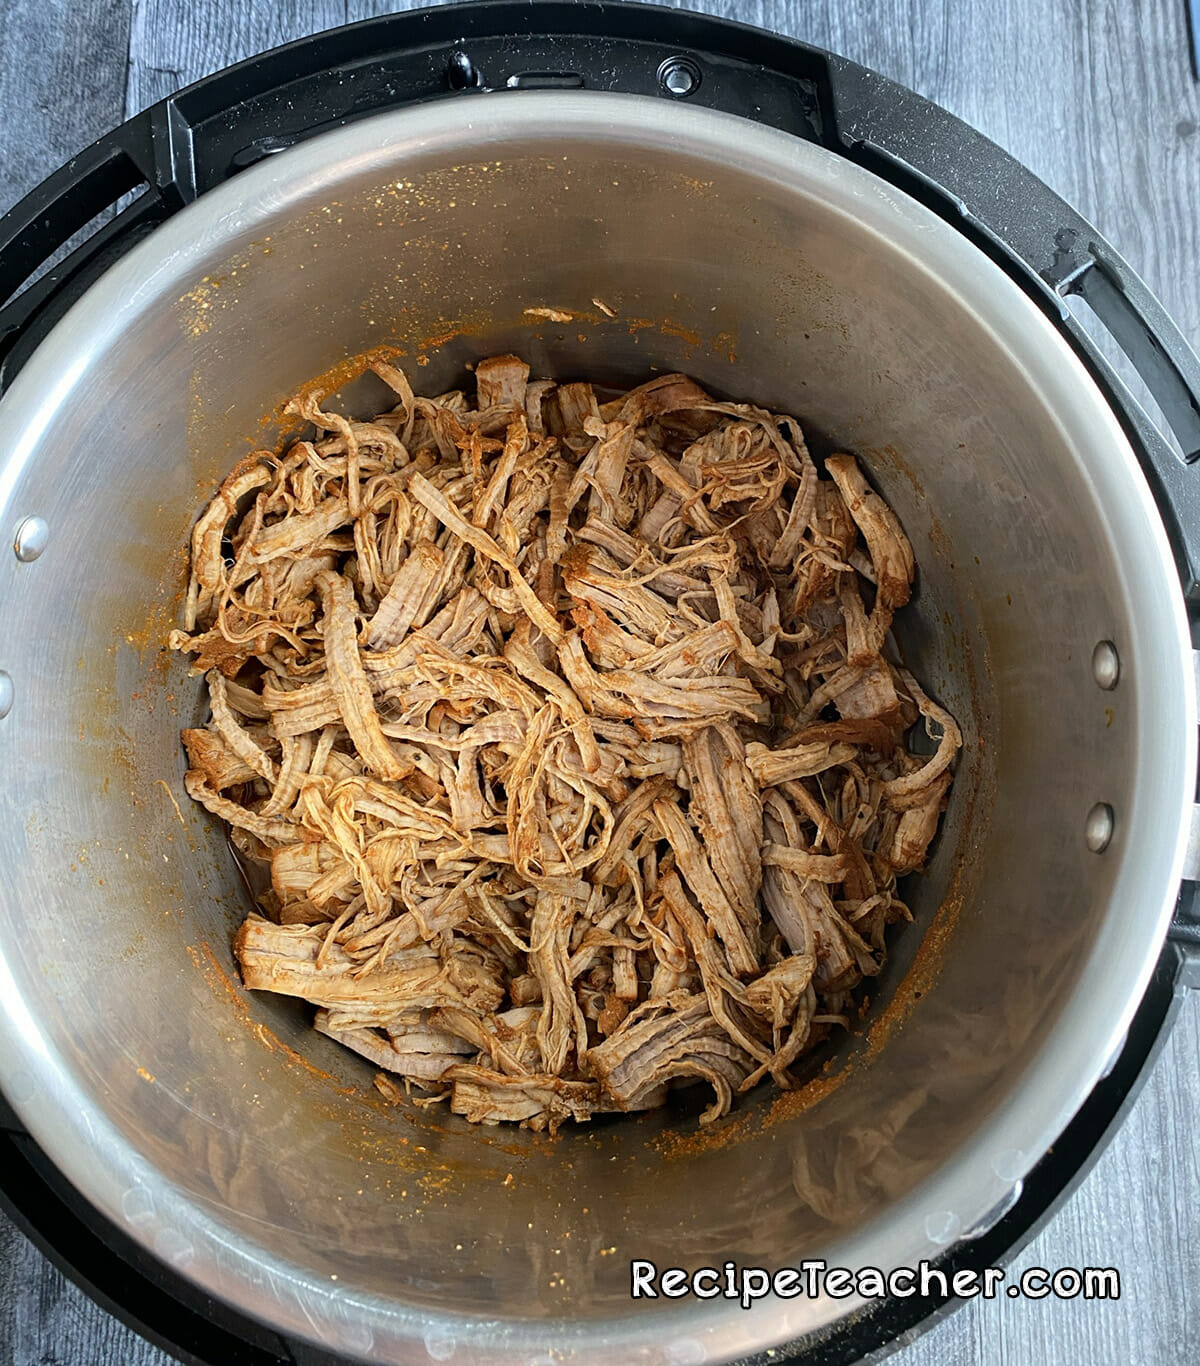 sweet, tangy and spicy Instant Pot pulled pork sandwiches